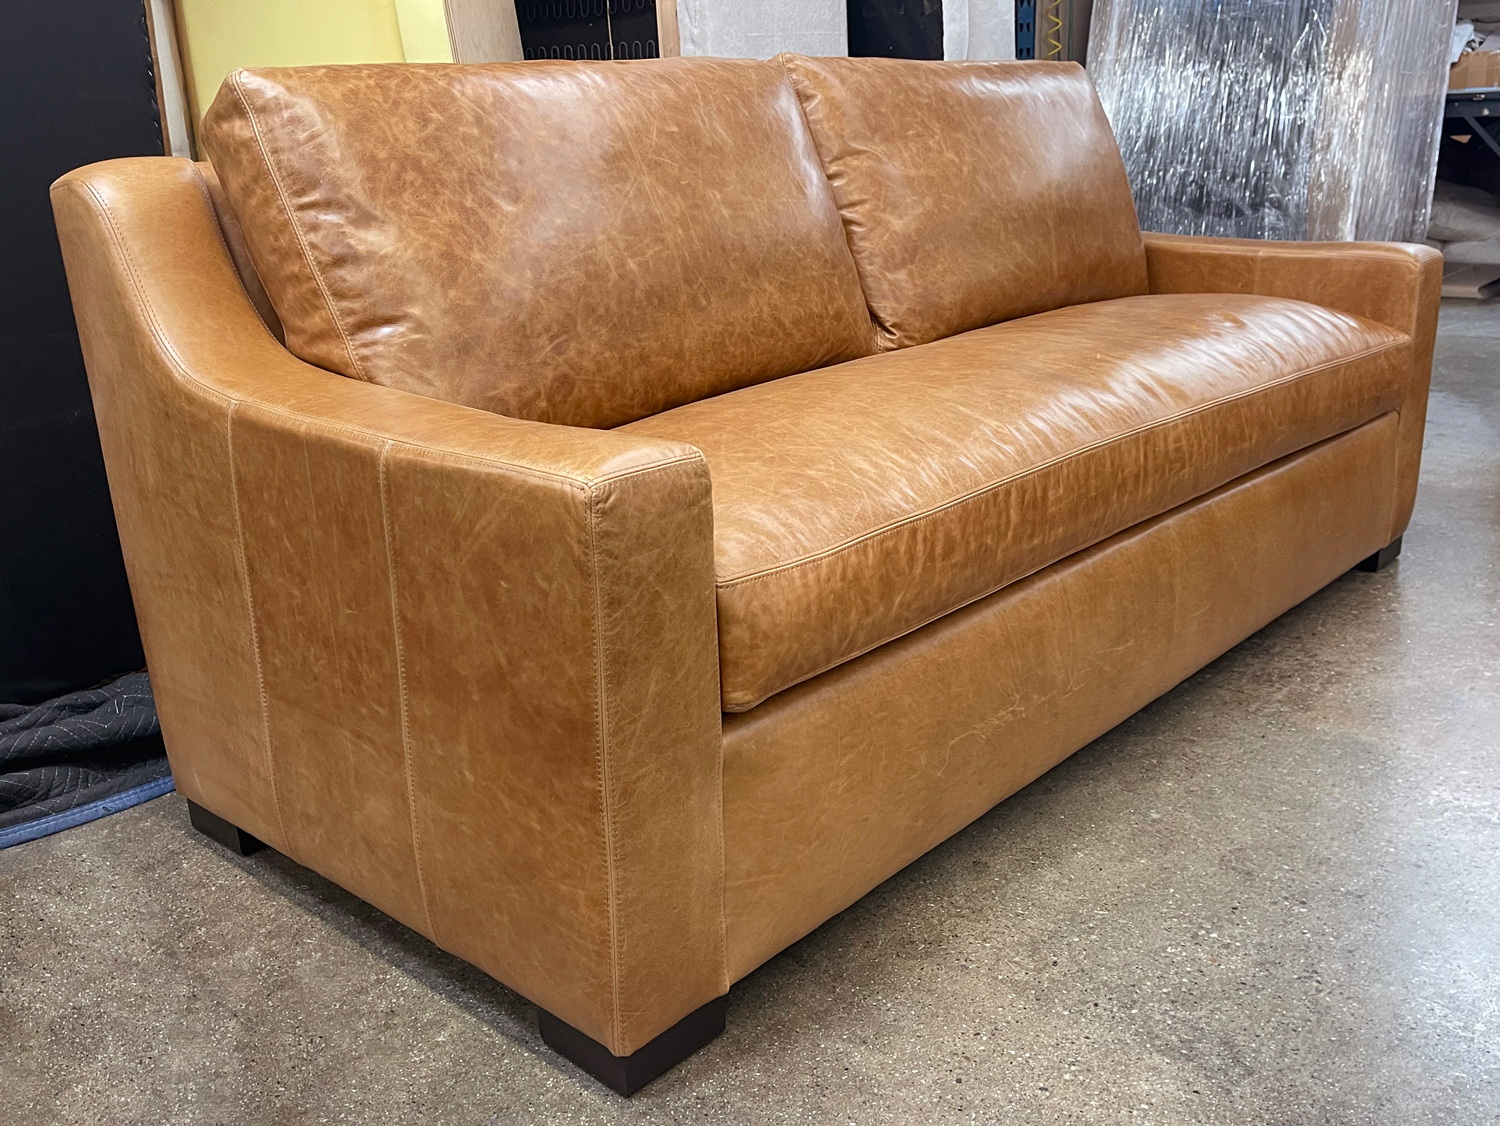 Julien Track Arm Sofa in Mont Blanc Sycamore Leather - 84" x 38" - left front angle